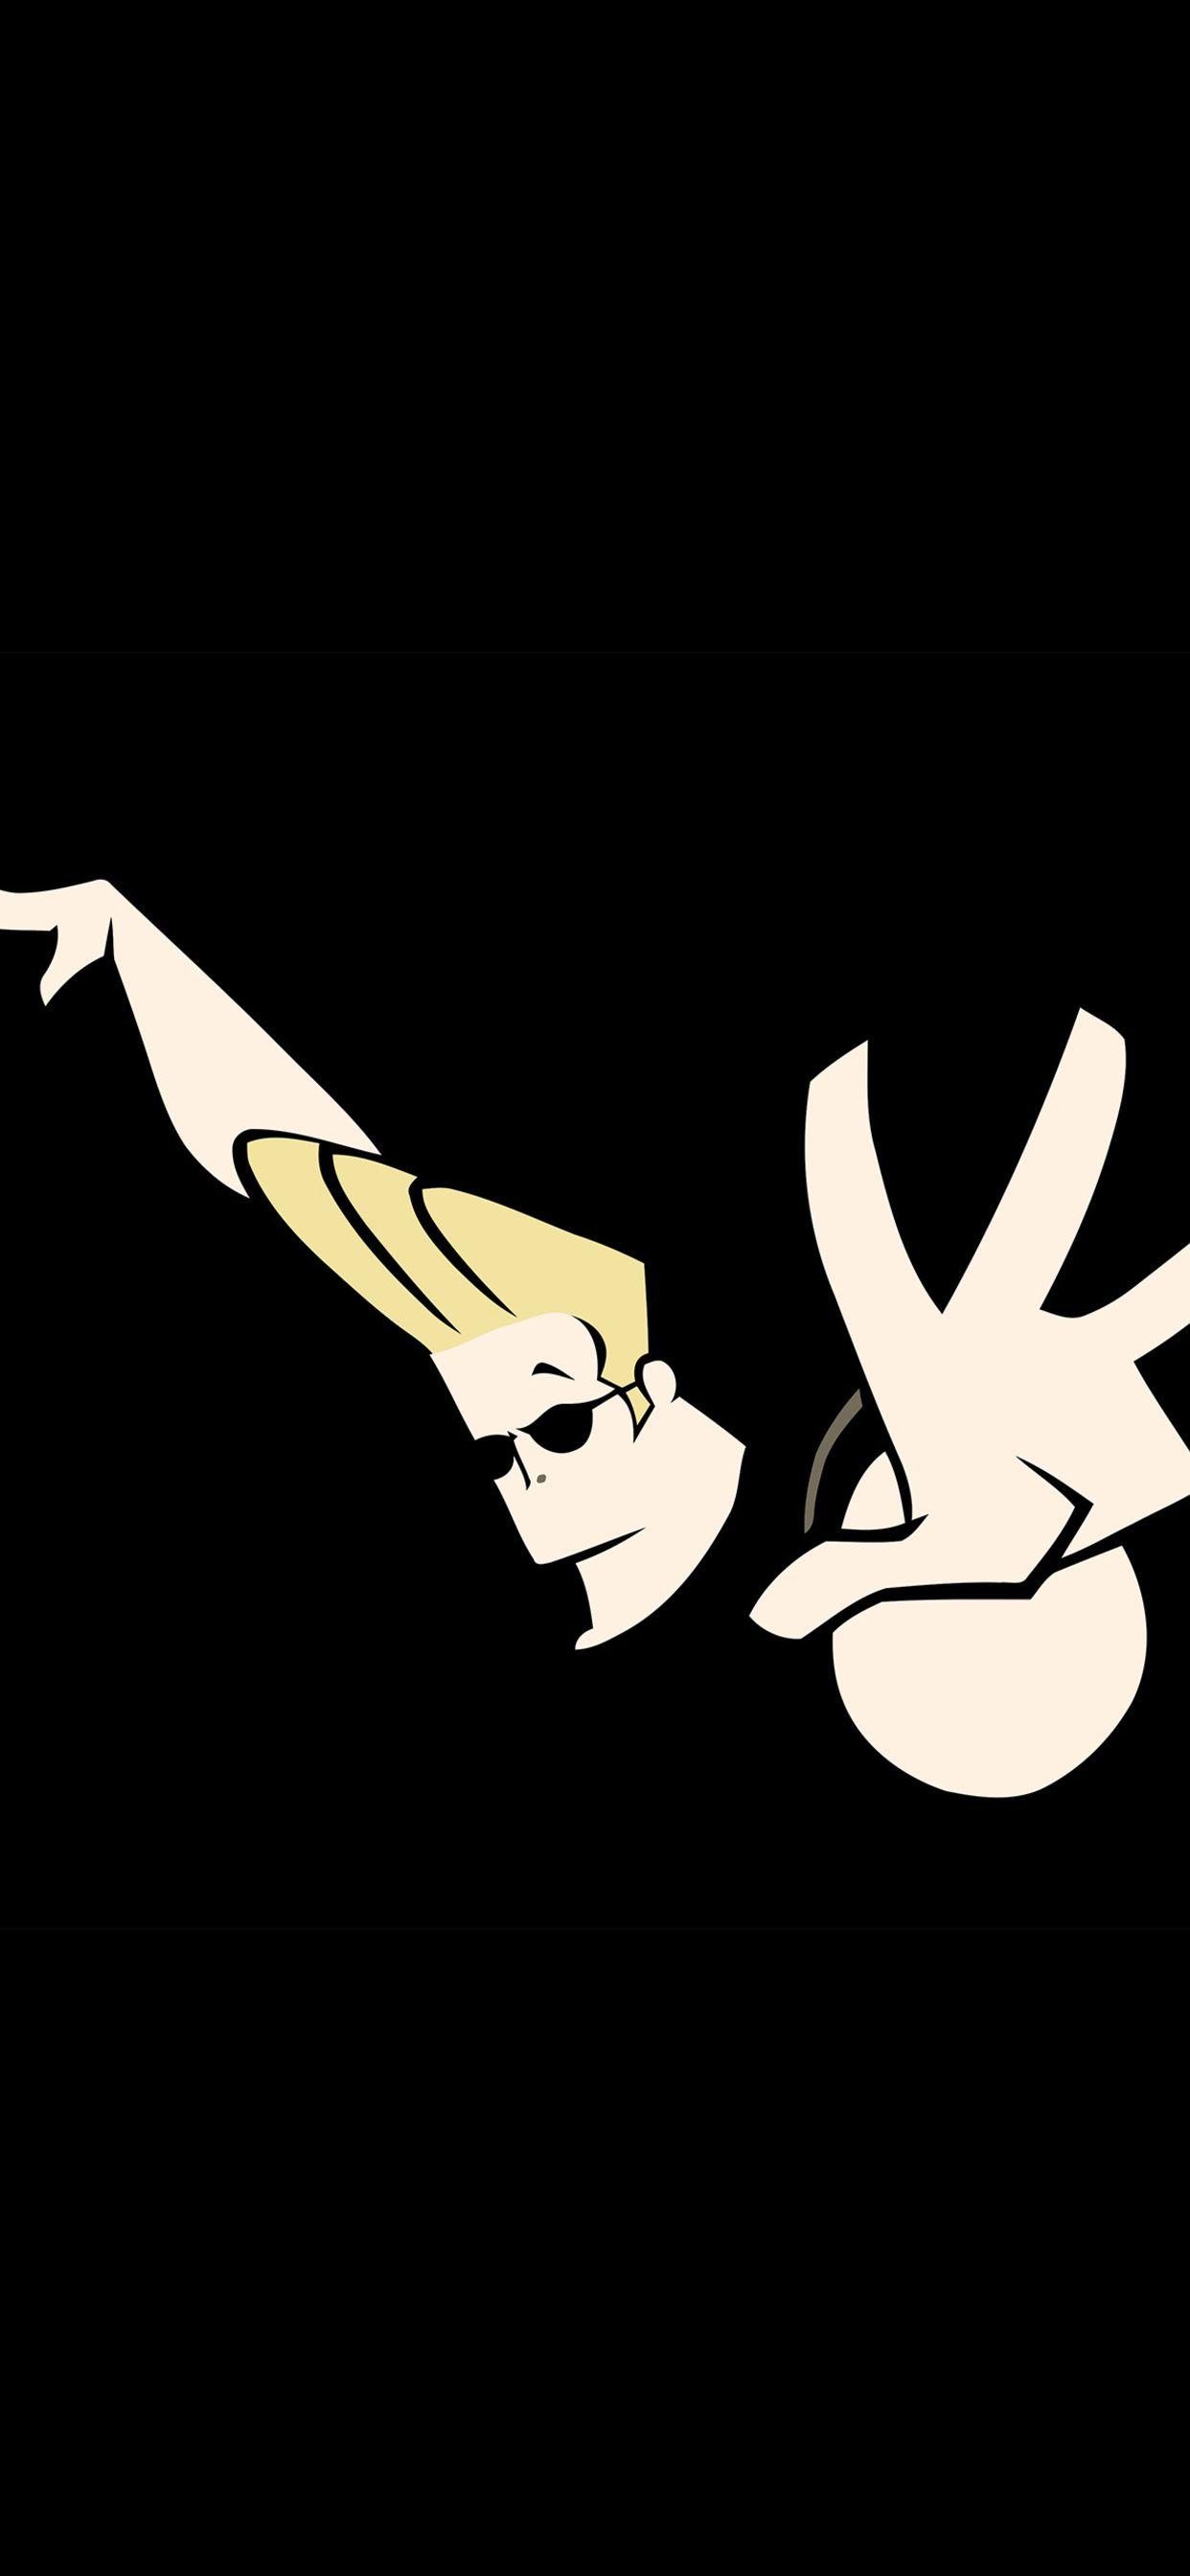 Johnny Bravo Phone Wallpapers Top Free Johnny Bravo Phone Backgrounds Wallpaperaccess